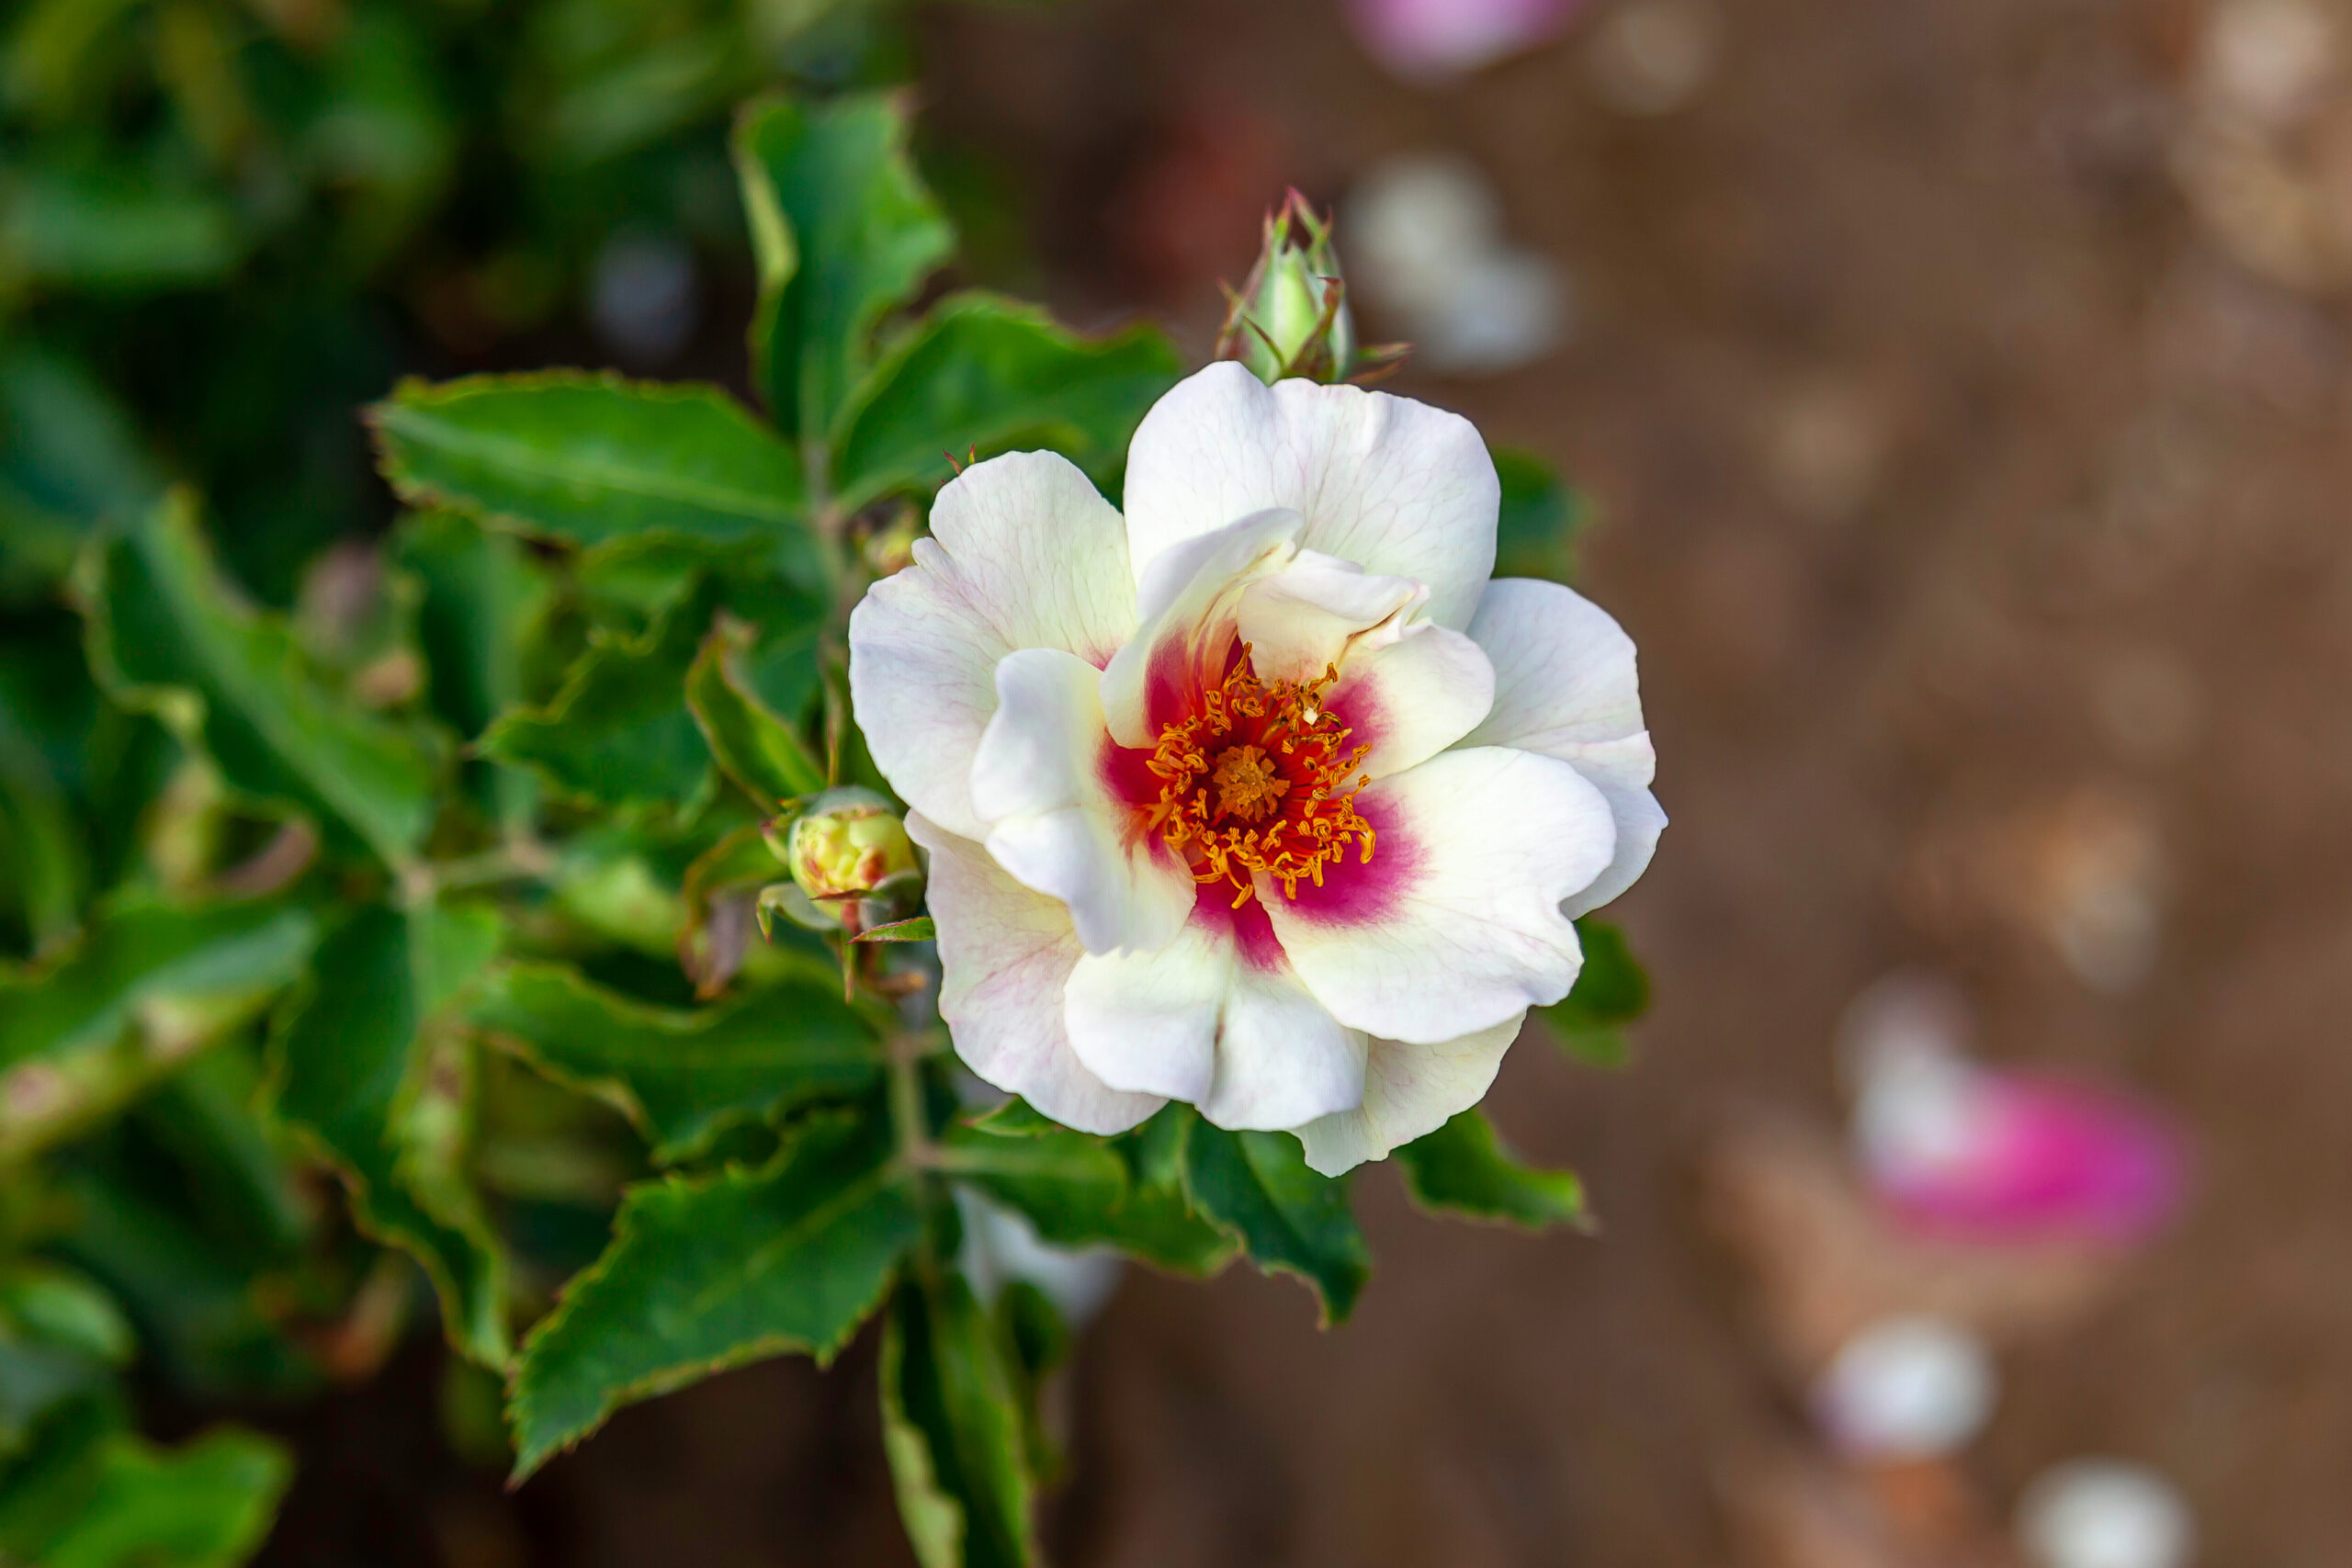 A single white rose with a crimson center, nestled among lush leaves, highlighting the unique beauty of floral diversity.